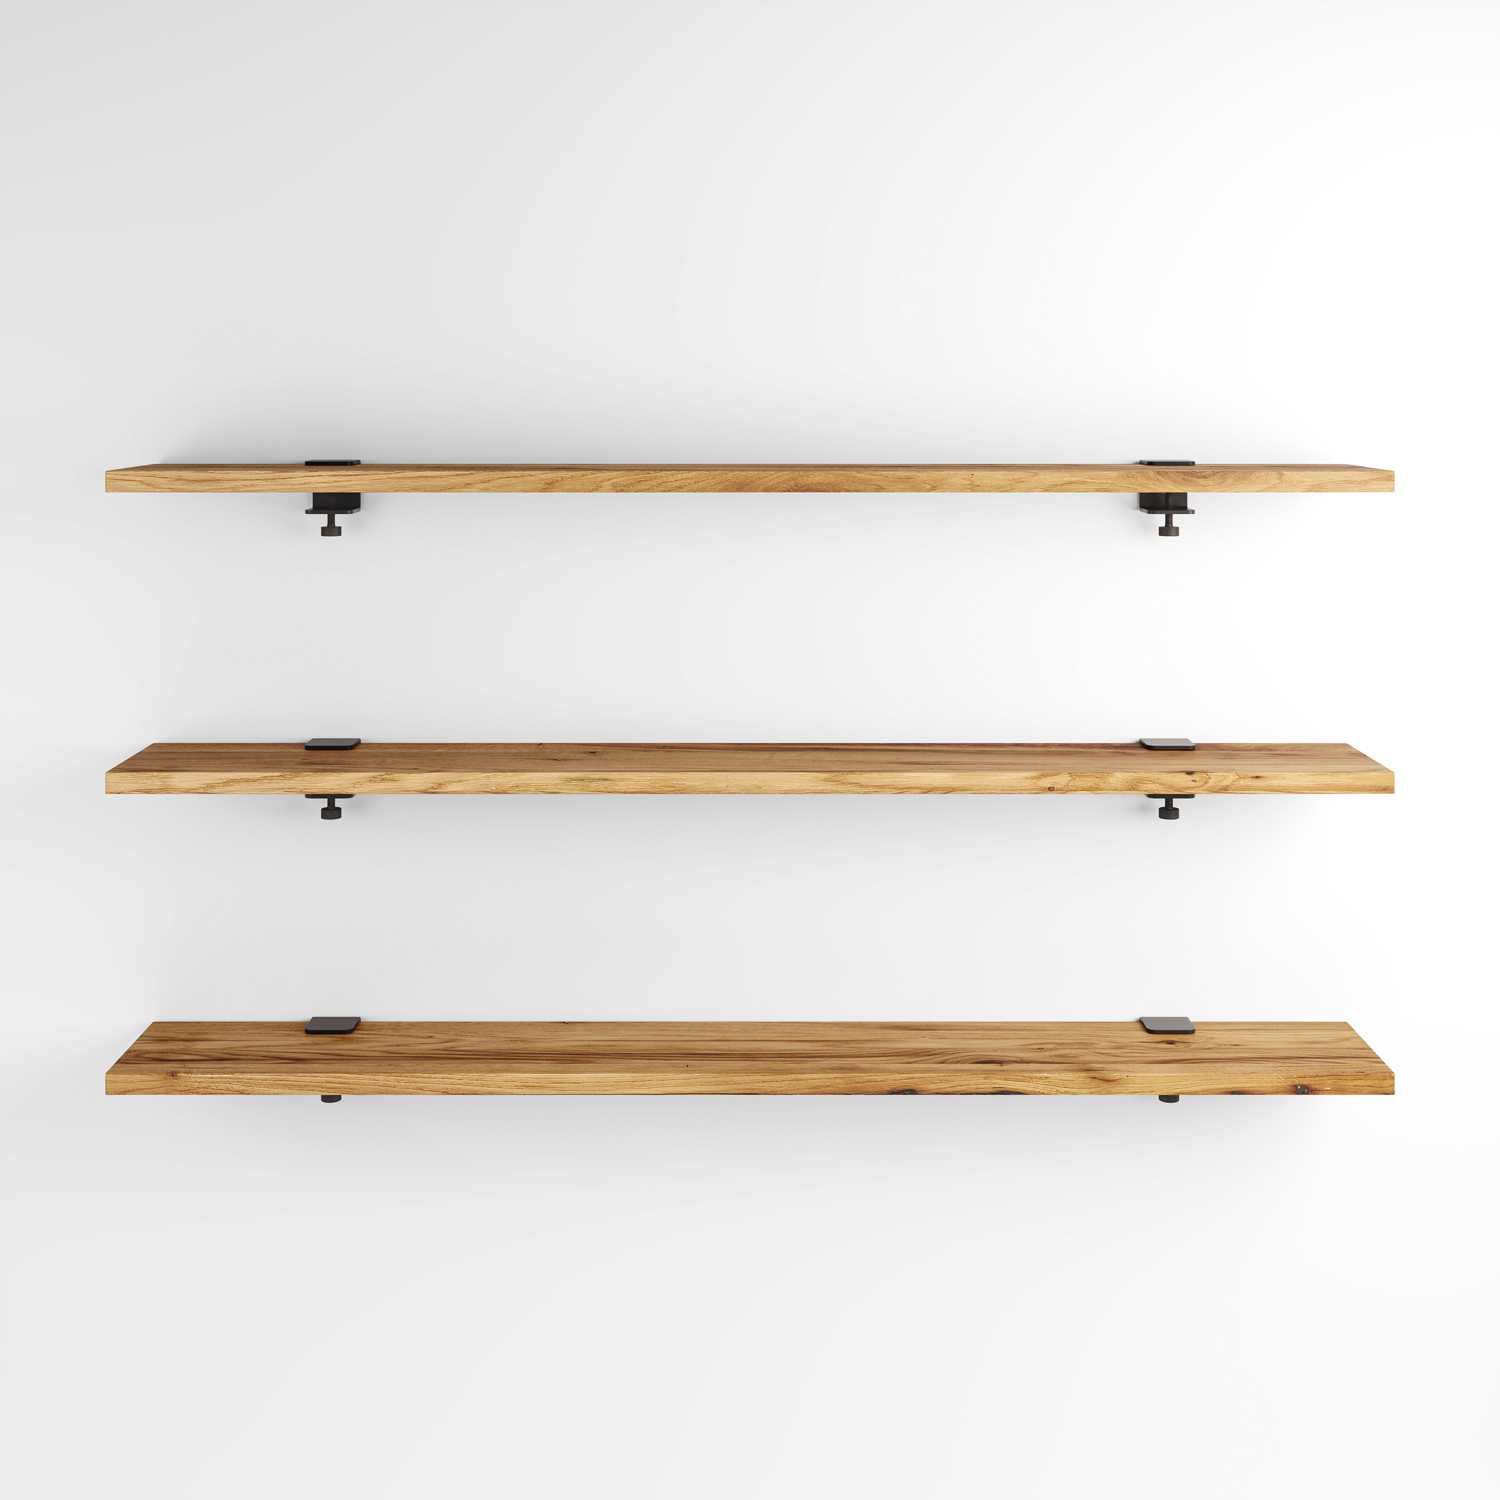 Set of 3 reclaimed wood wall shelves - 60 to 150 cm